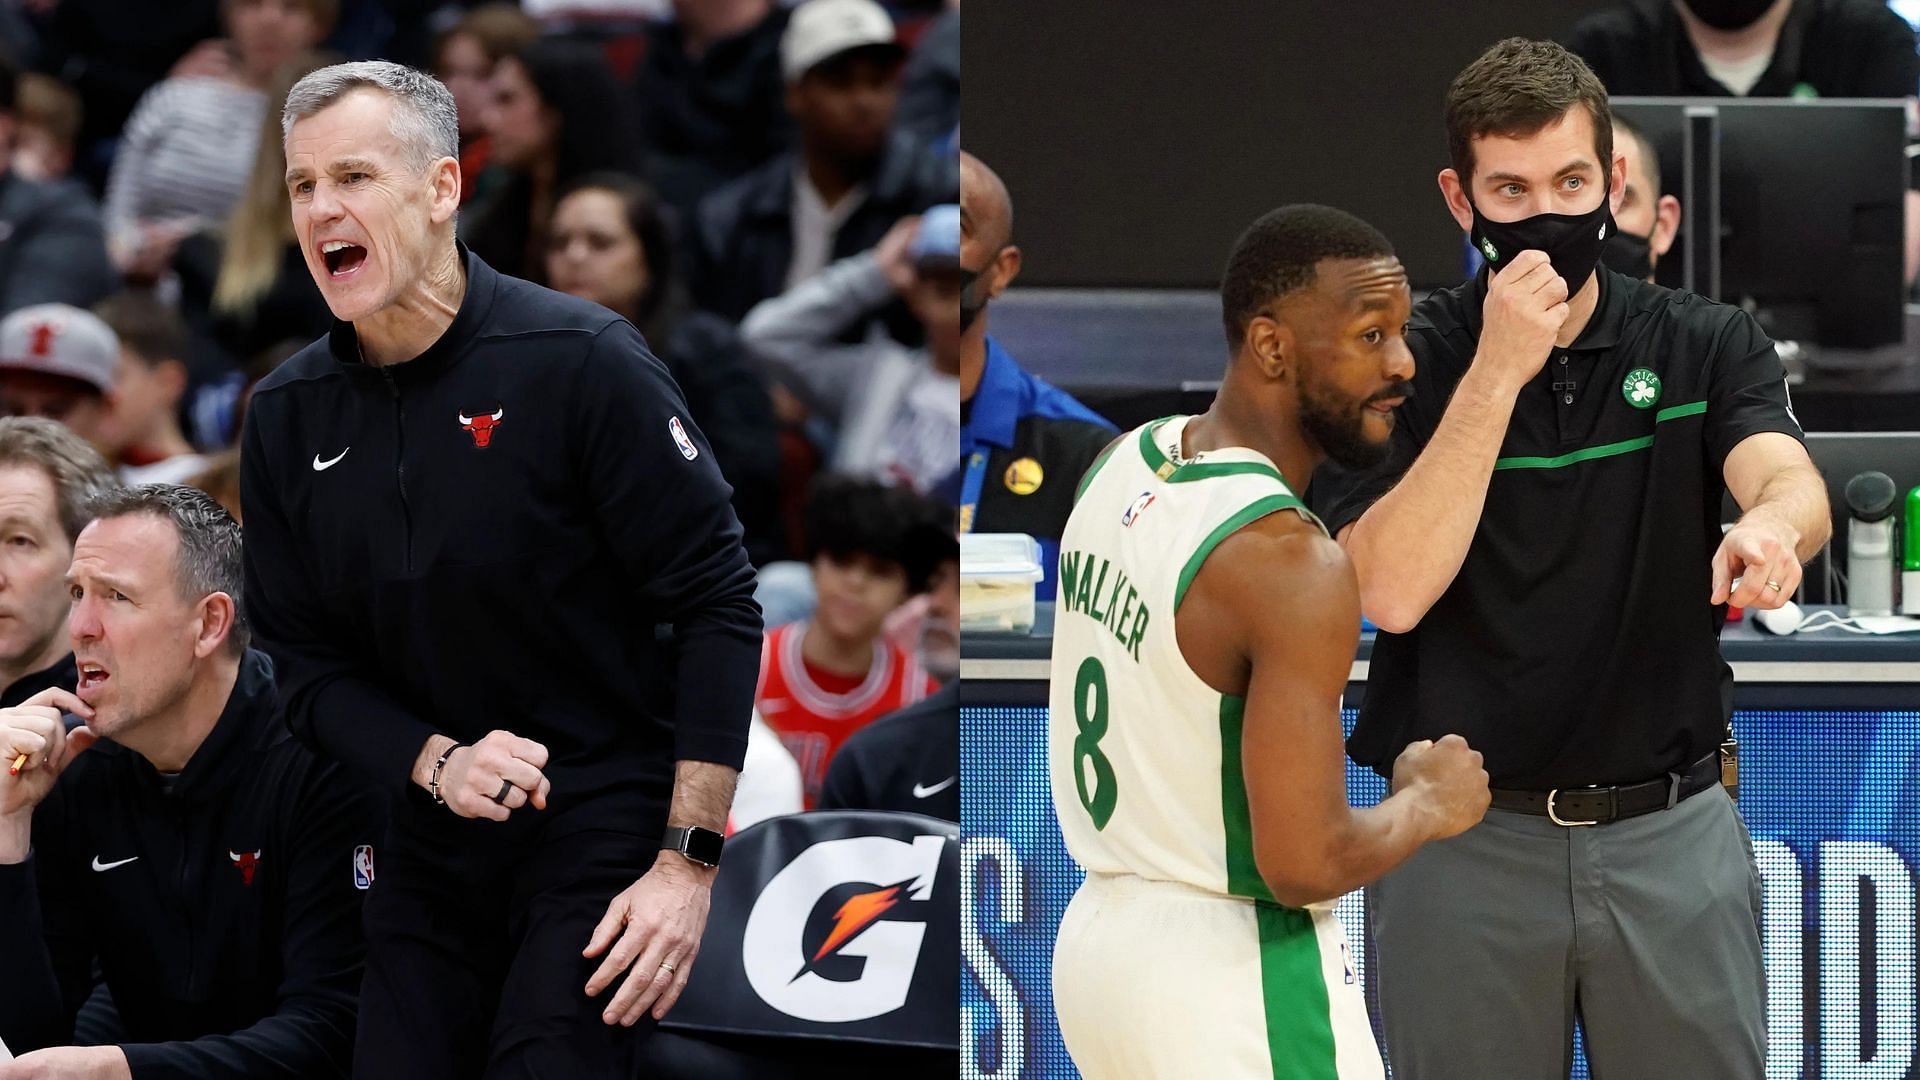 Billy Donovan and Brad Stevens are among the top former college coaches who had success transitioning to the NBA